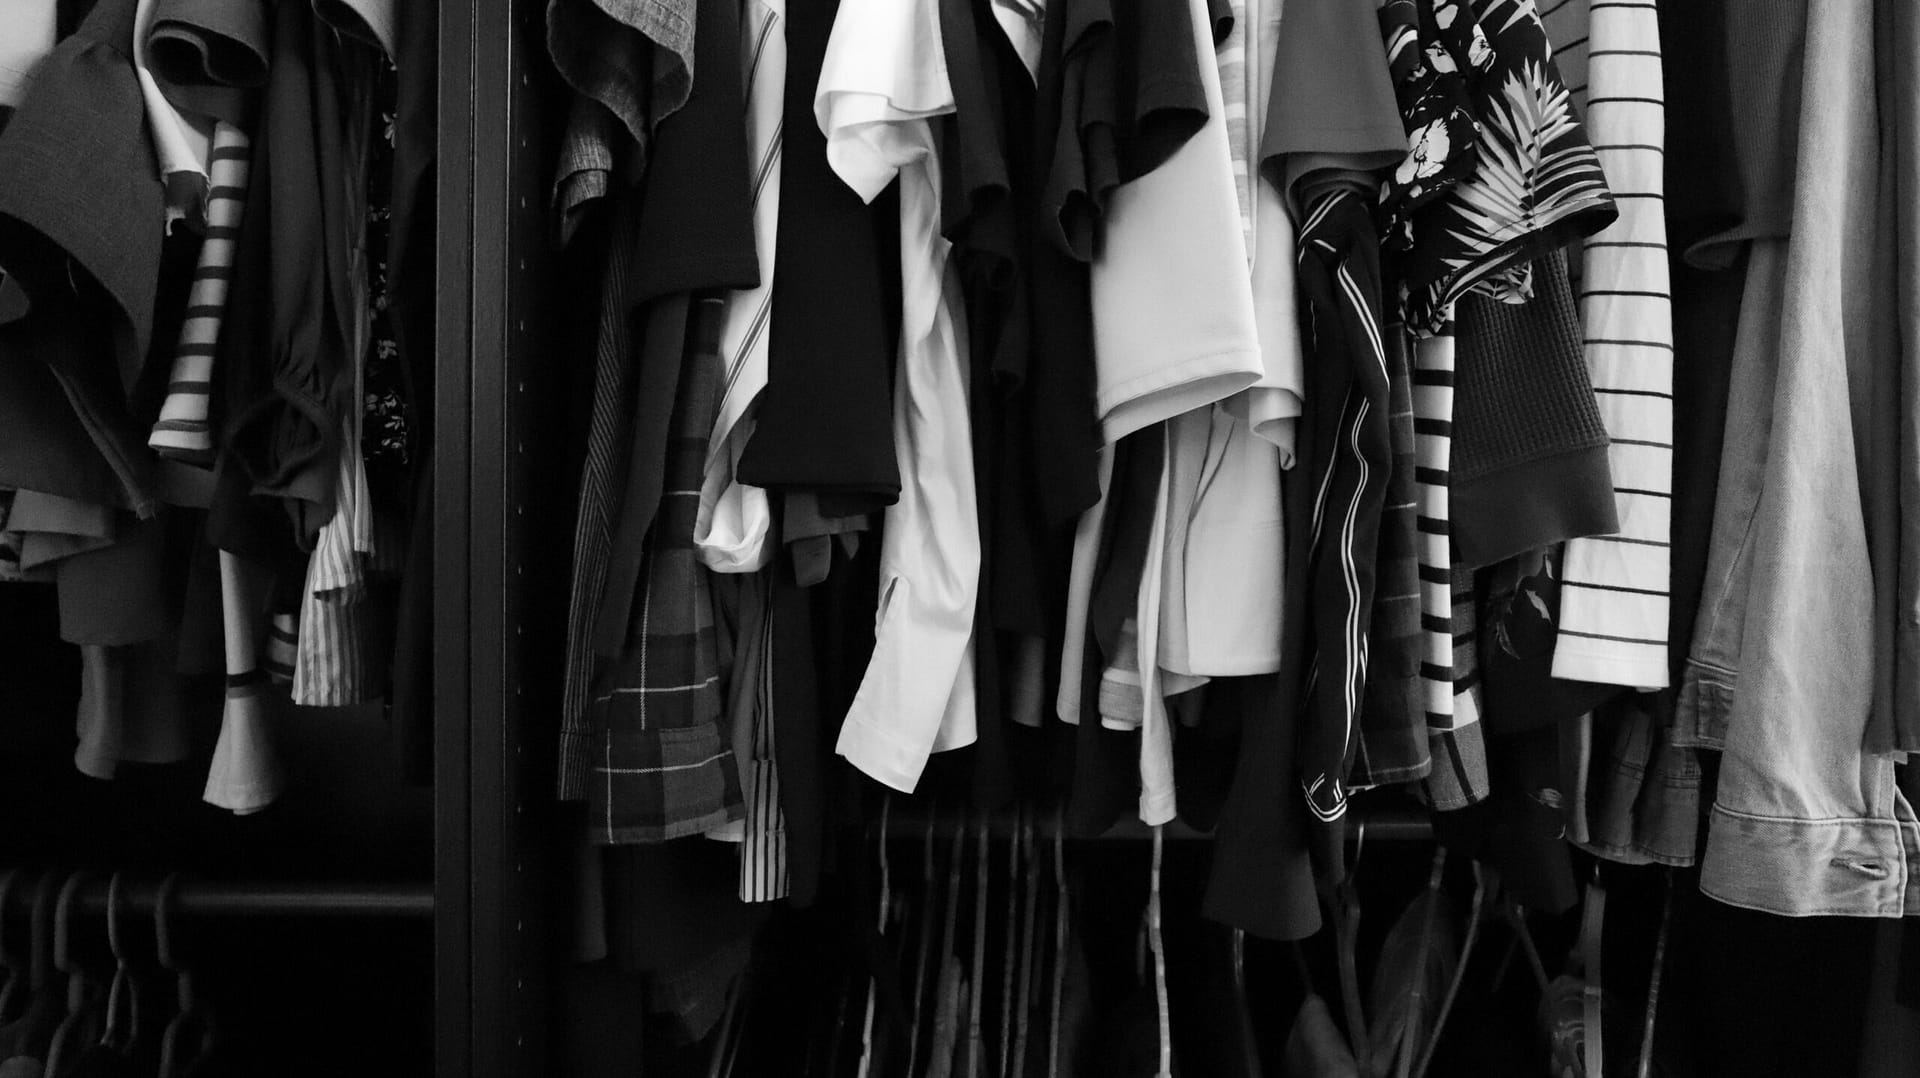 10 Ways to be sustainable by giving your current wardrobe a new lease of life